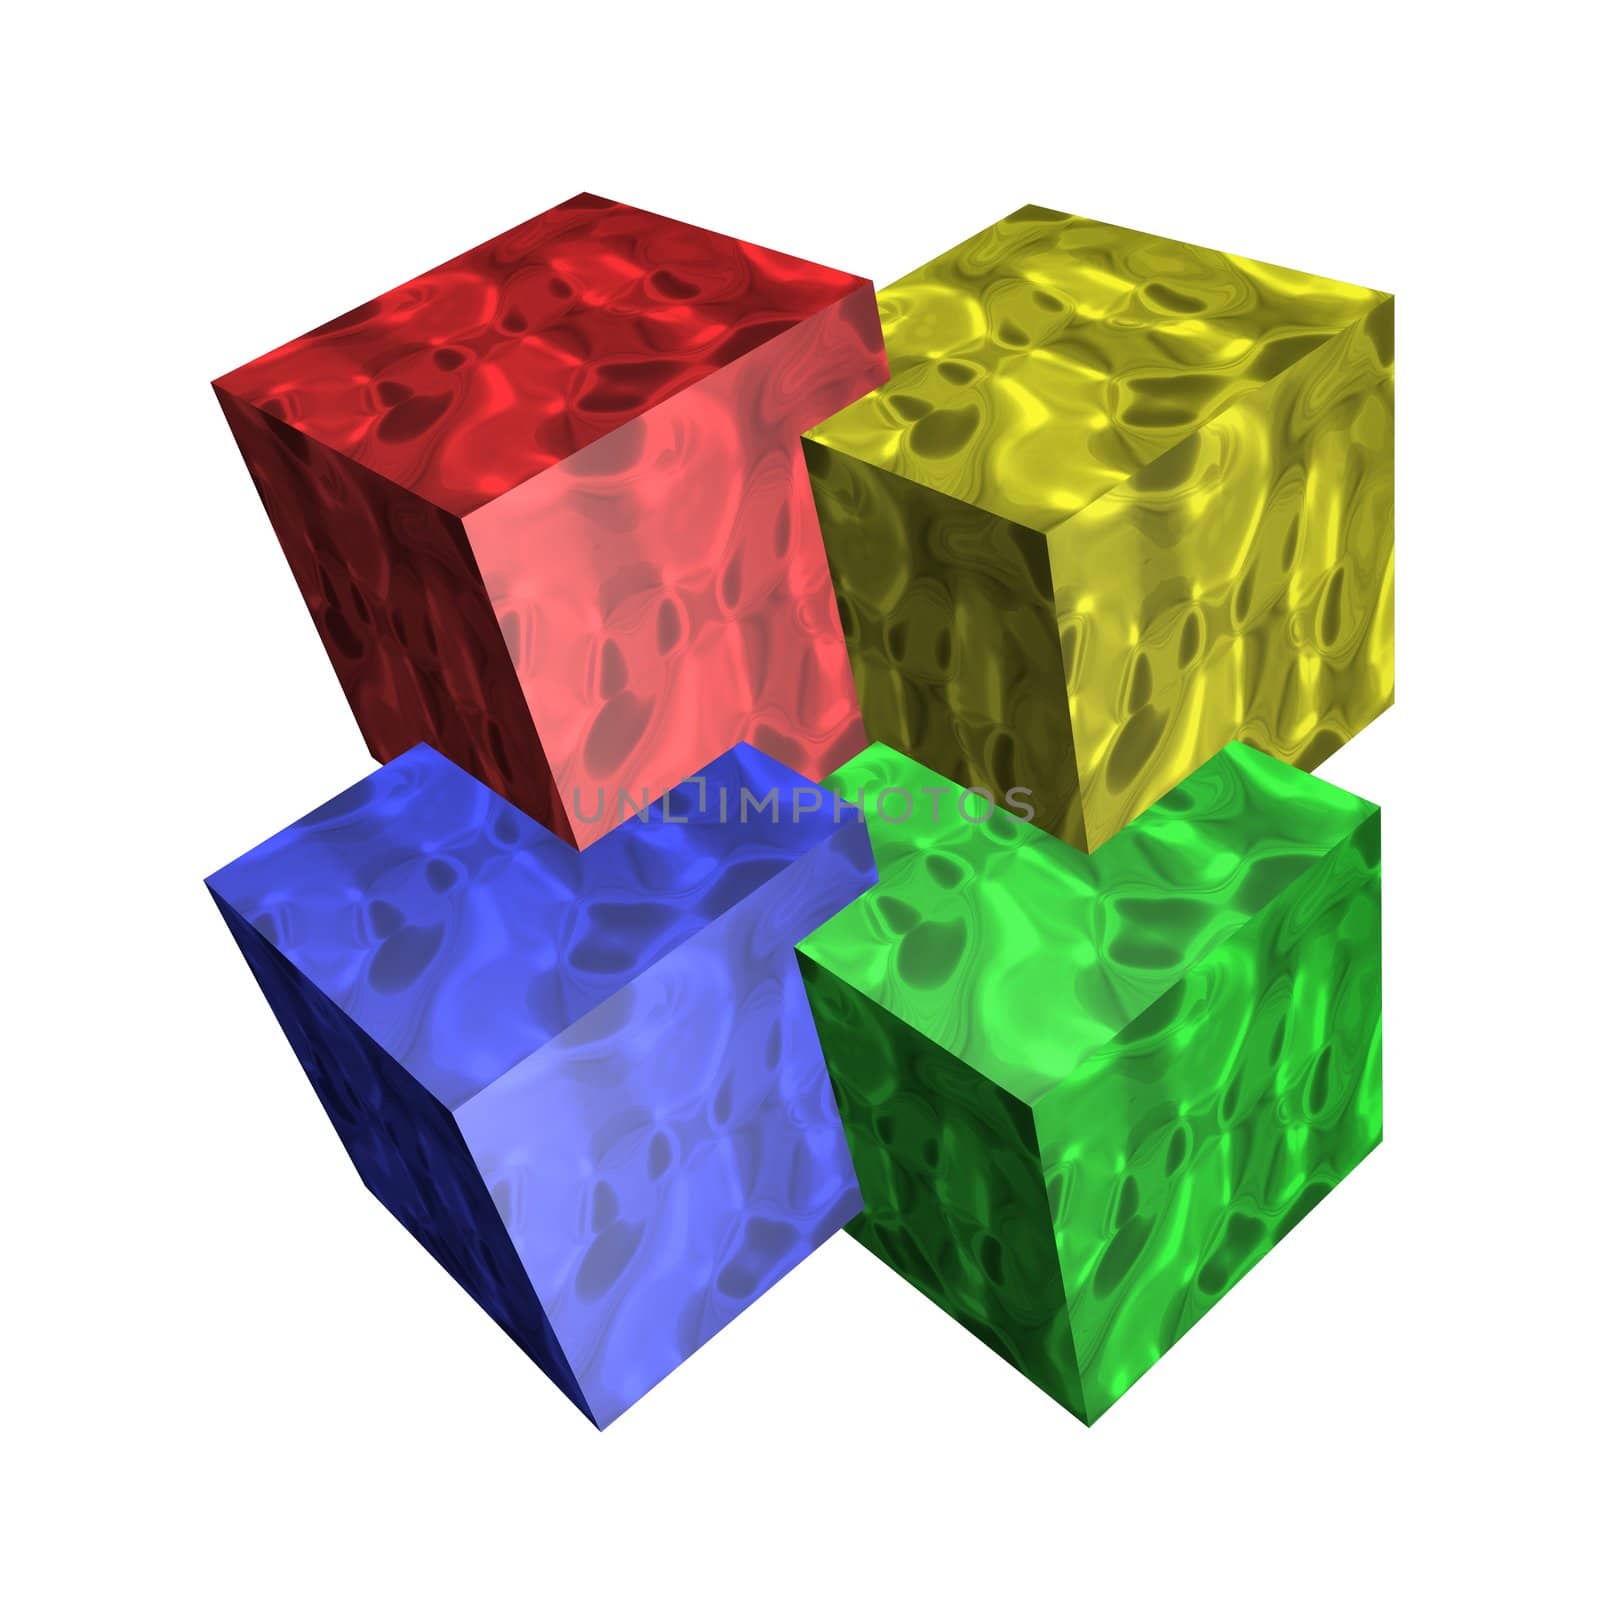 Cubes by Kitch